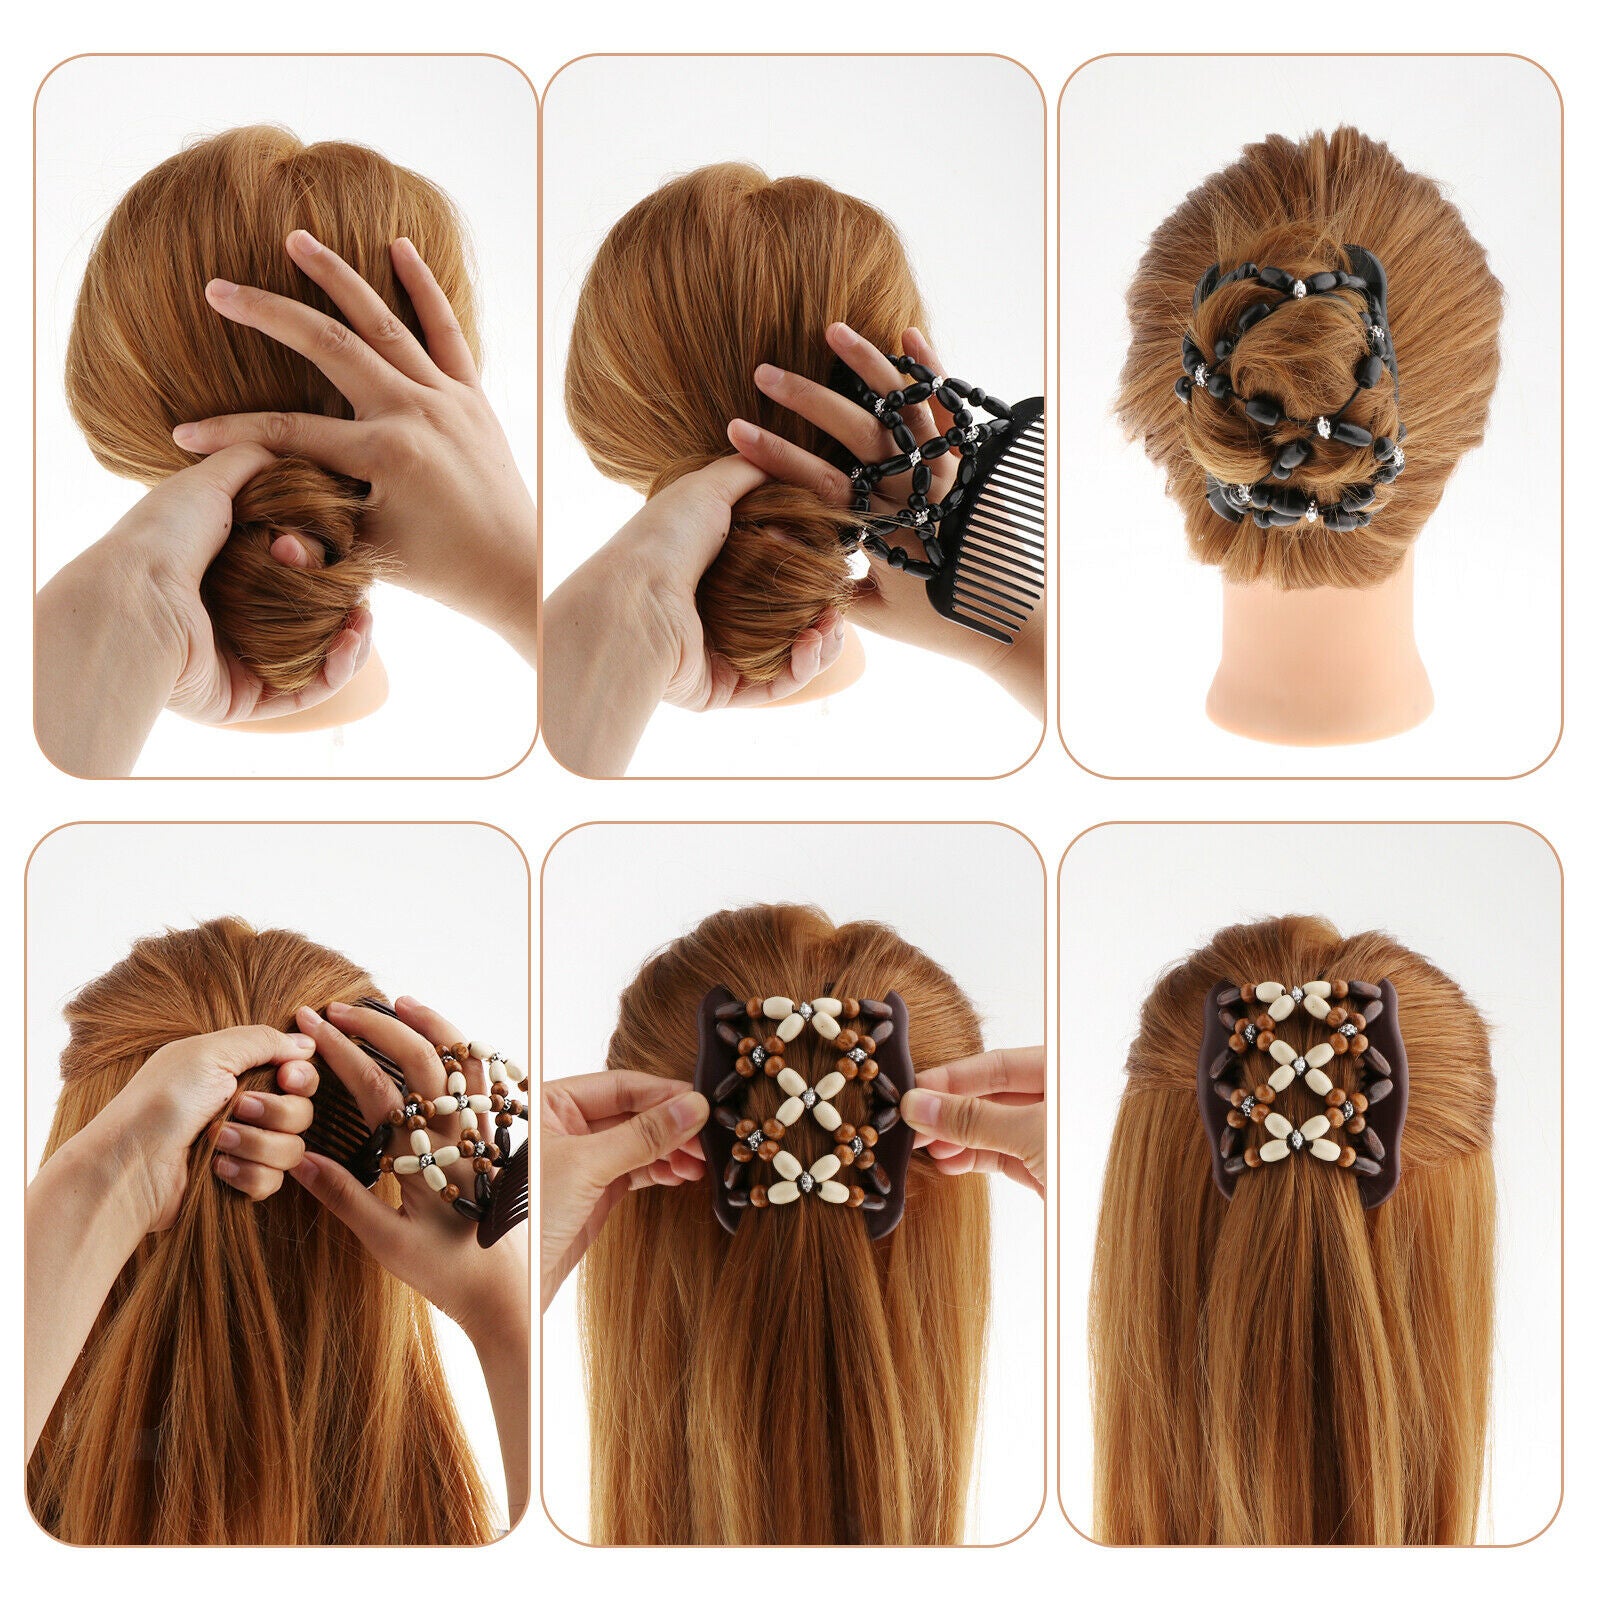 2x Wooden Beaded Double Hair Comb Clip Women Hair Stying Accessory